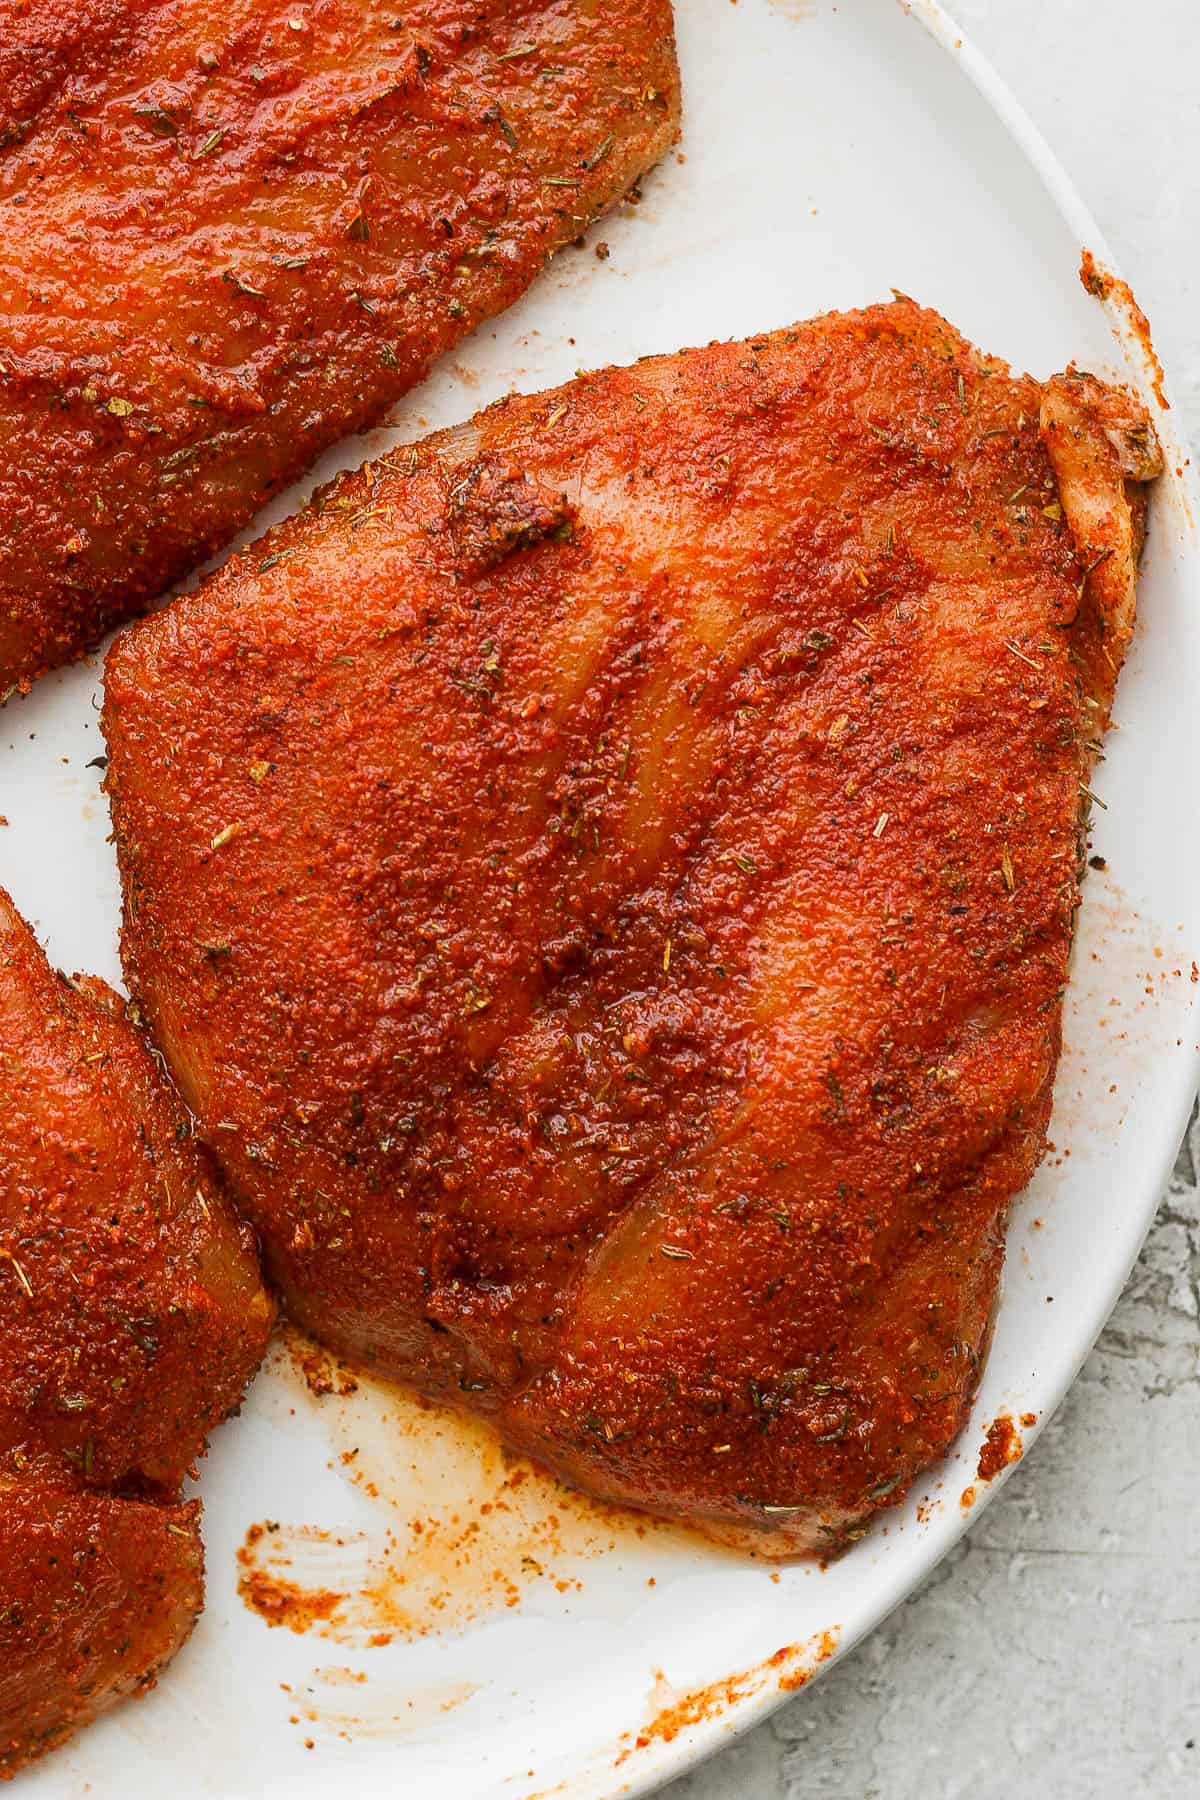 Chicken breasts on a plate with seasoning and oil rubbed on them.